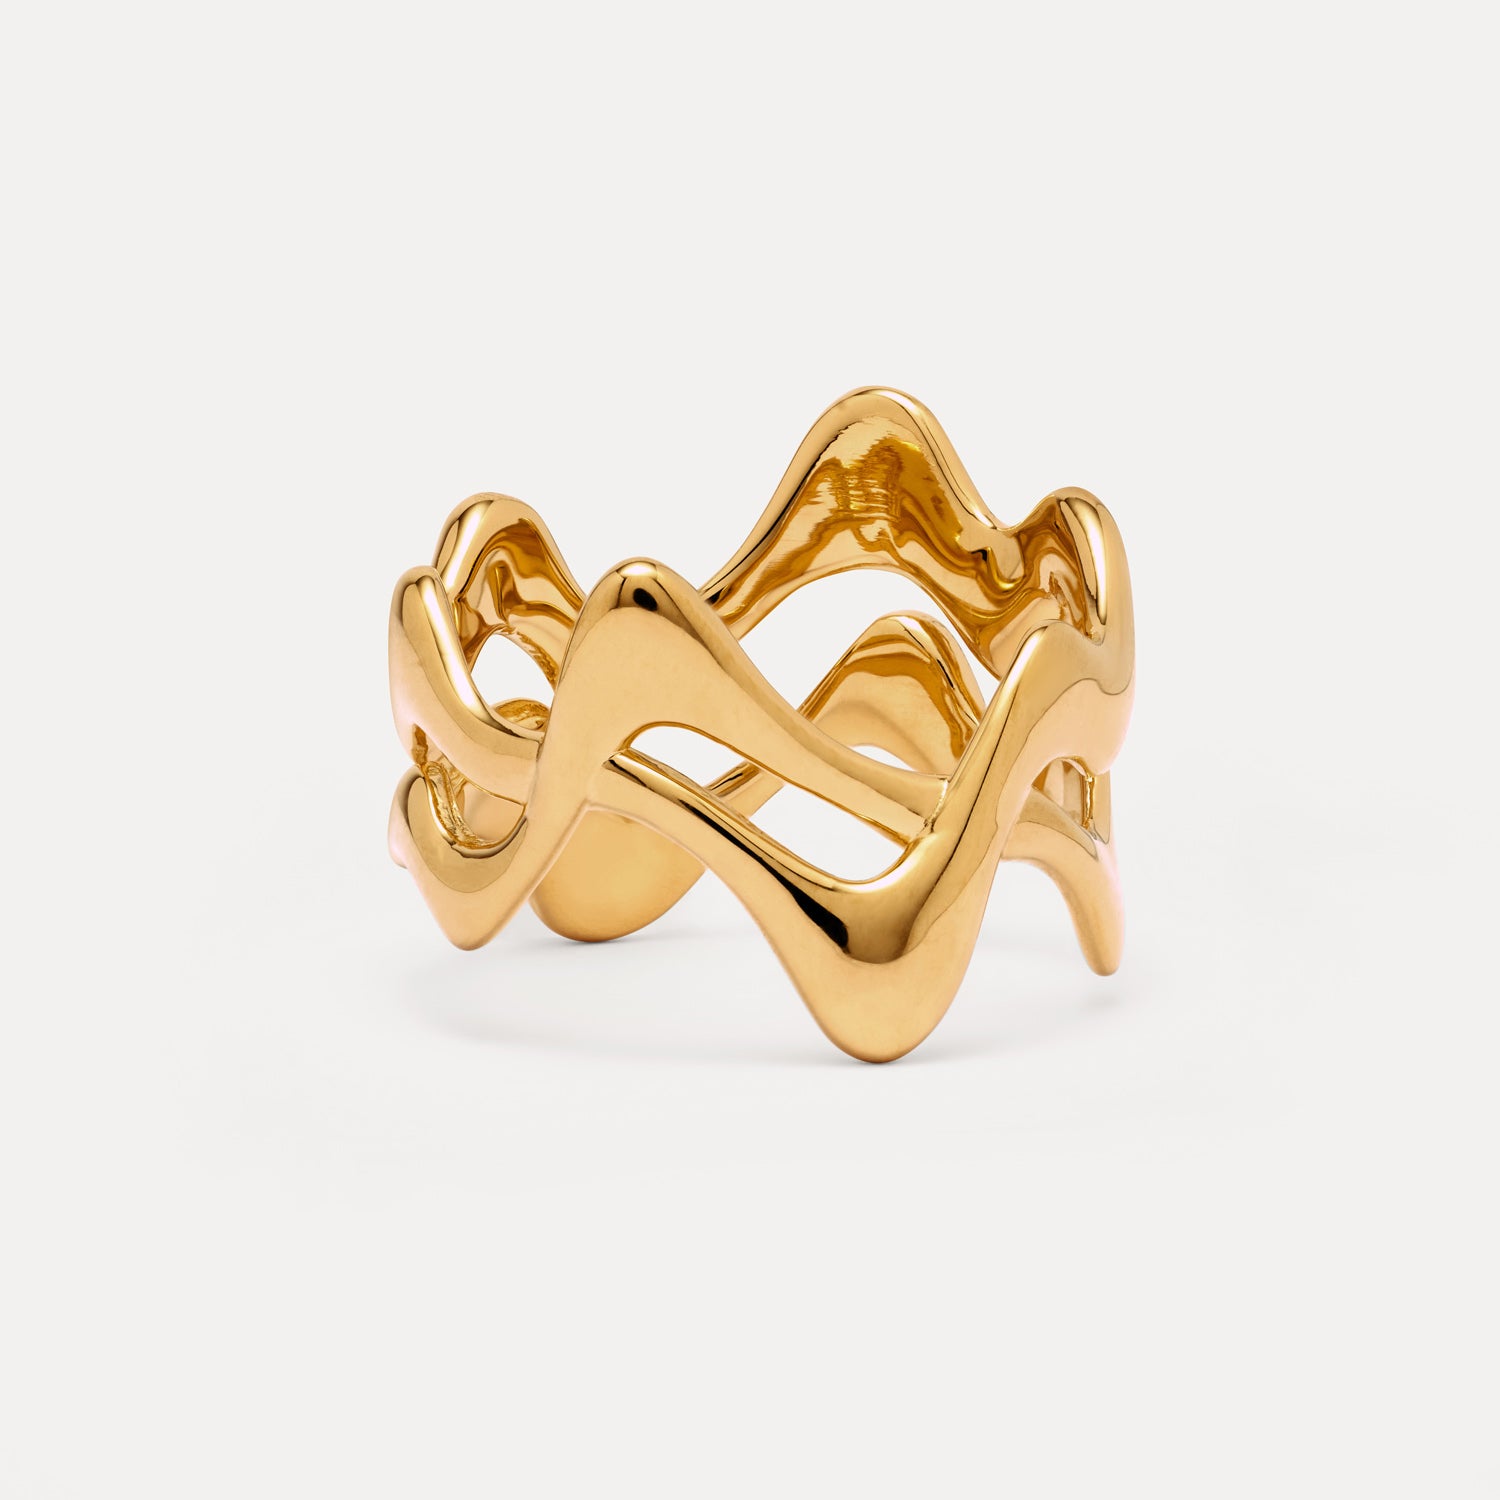 Poise Double Pre-Stacked Ring, recycled 18k Gold Vermeil - VEYIA Berlin